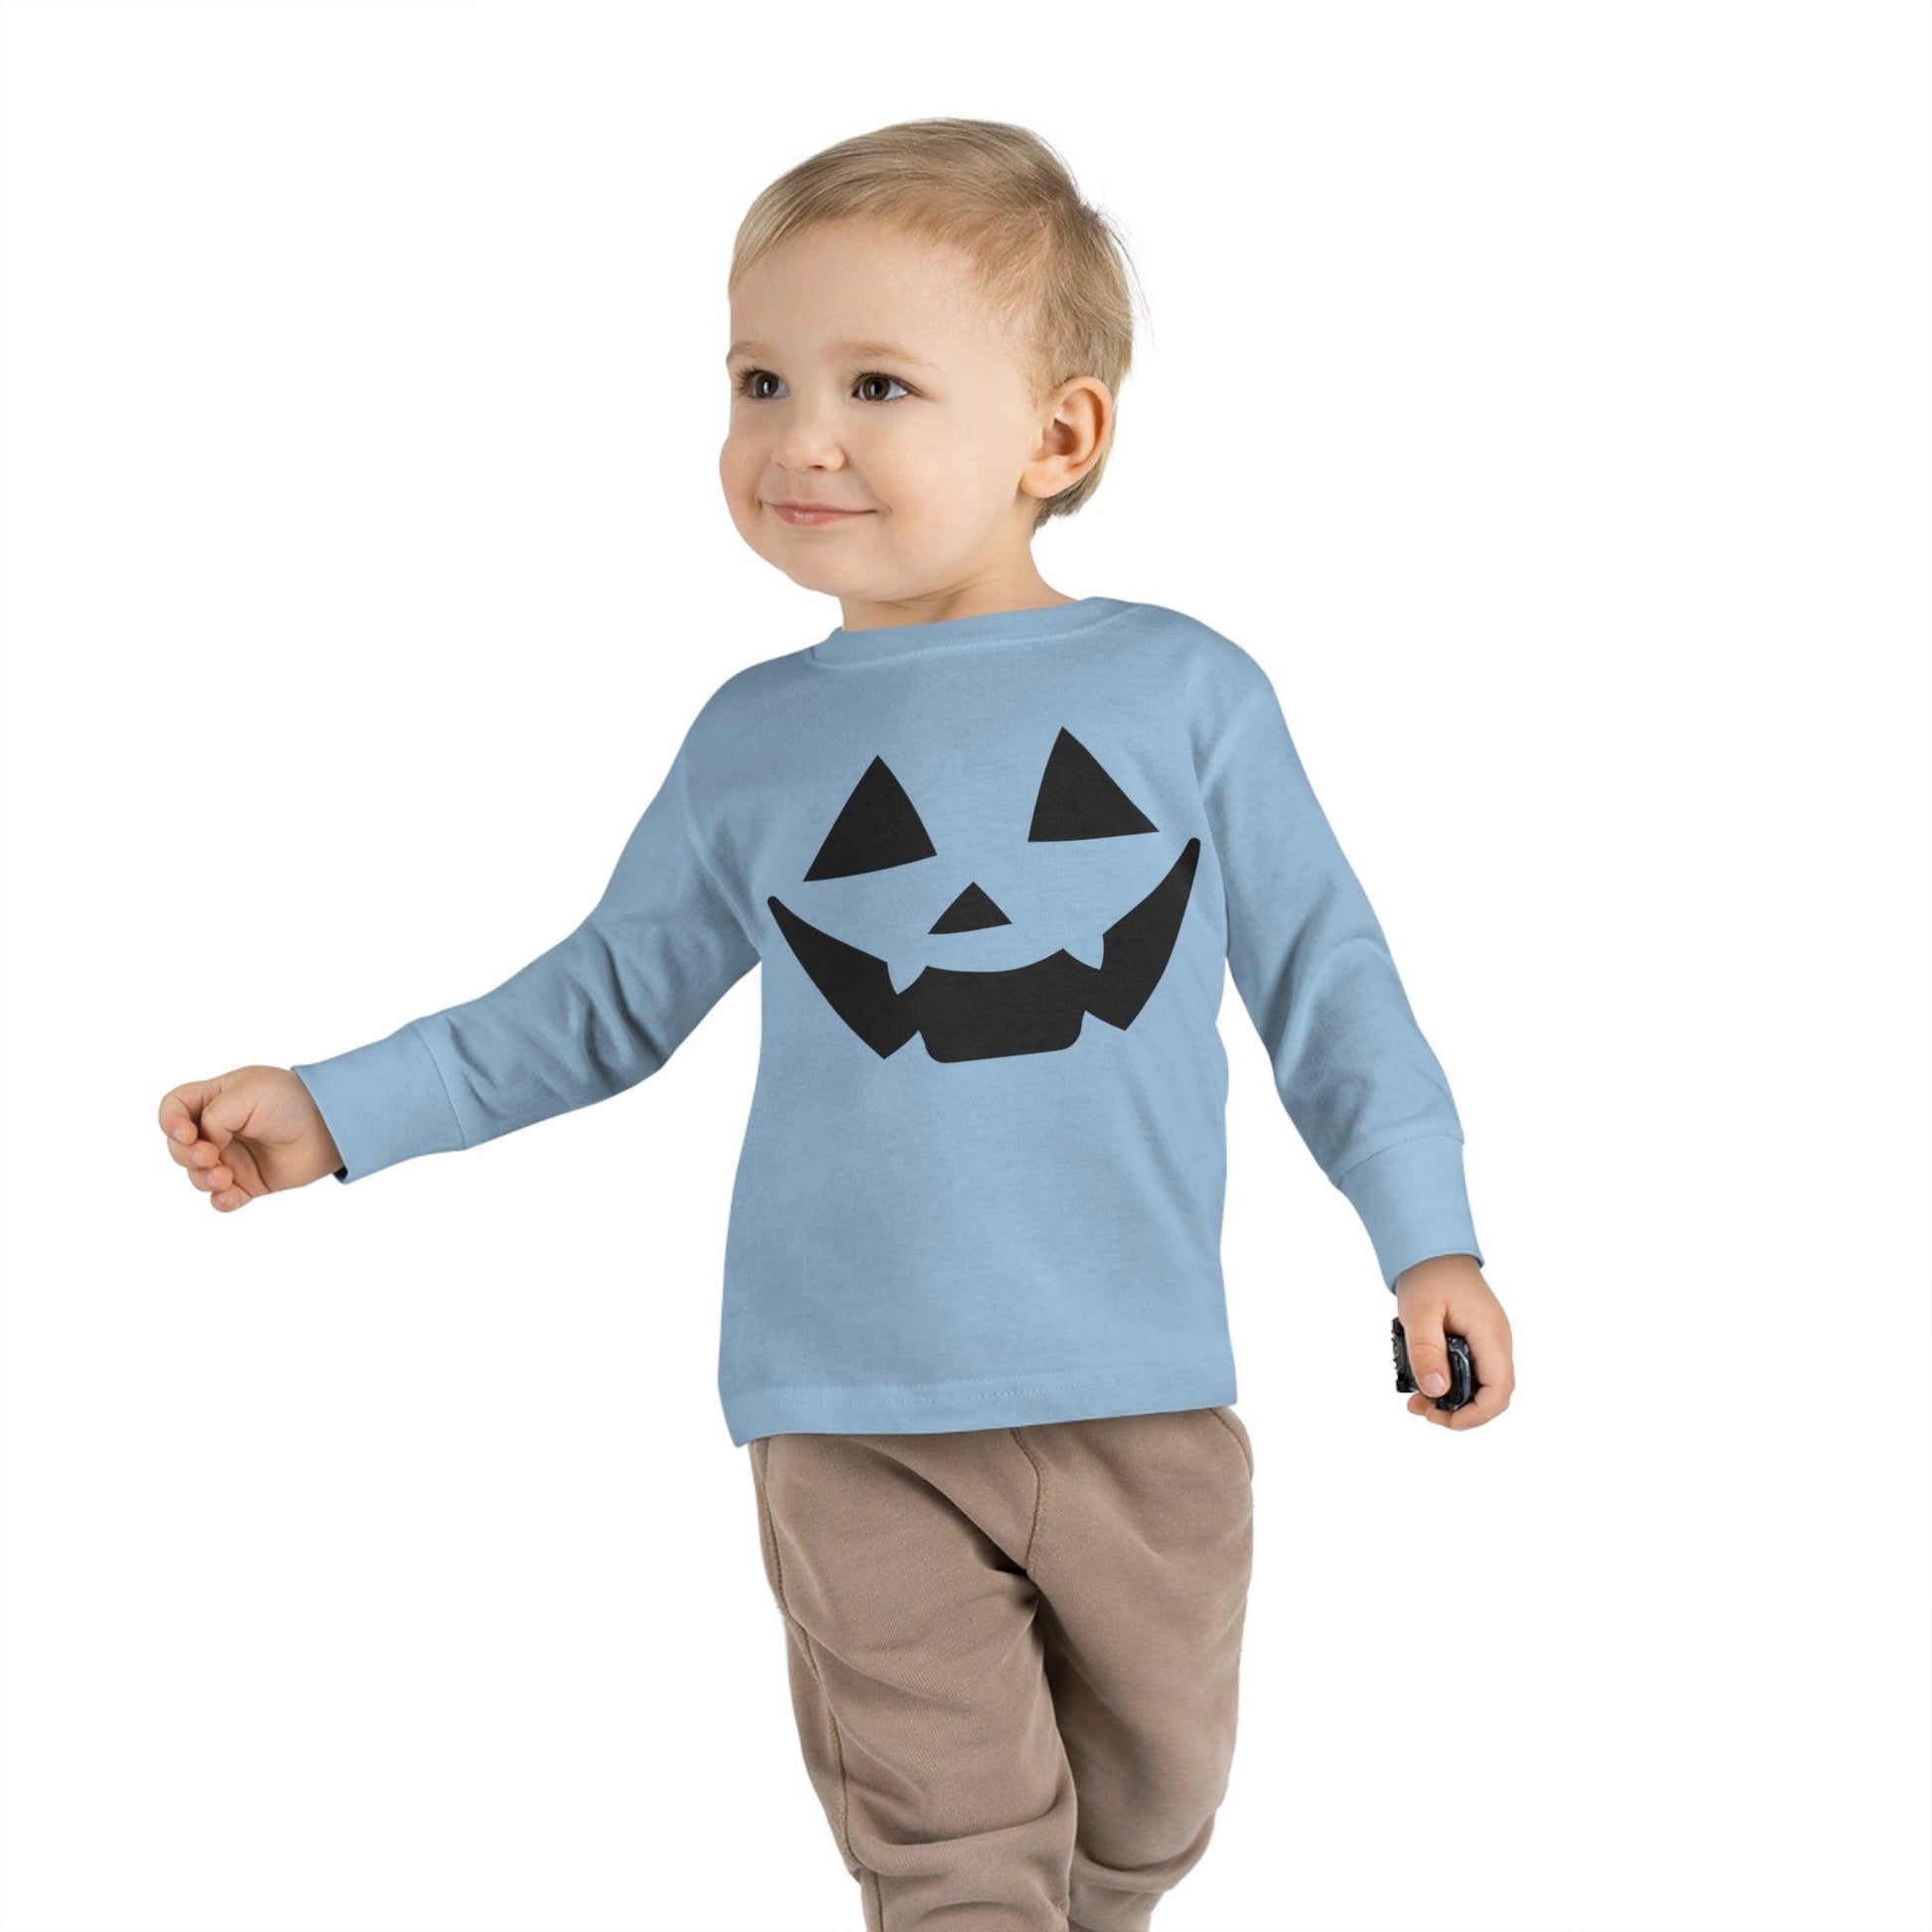 Kids Scary Faces Halloween Pumpkin Face Shirt Kids Jack O Lantern Shirt Kids Halloween Shirt Kids Long Sleeve Trick or Treat Outfit for Halloween - Giftsmojo